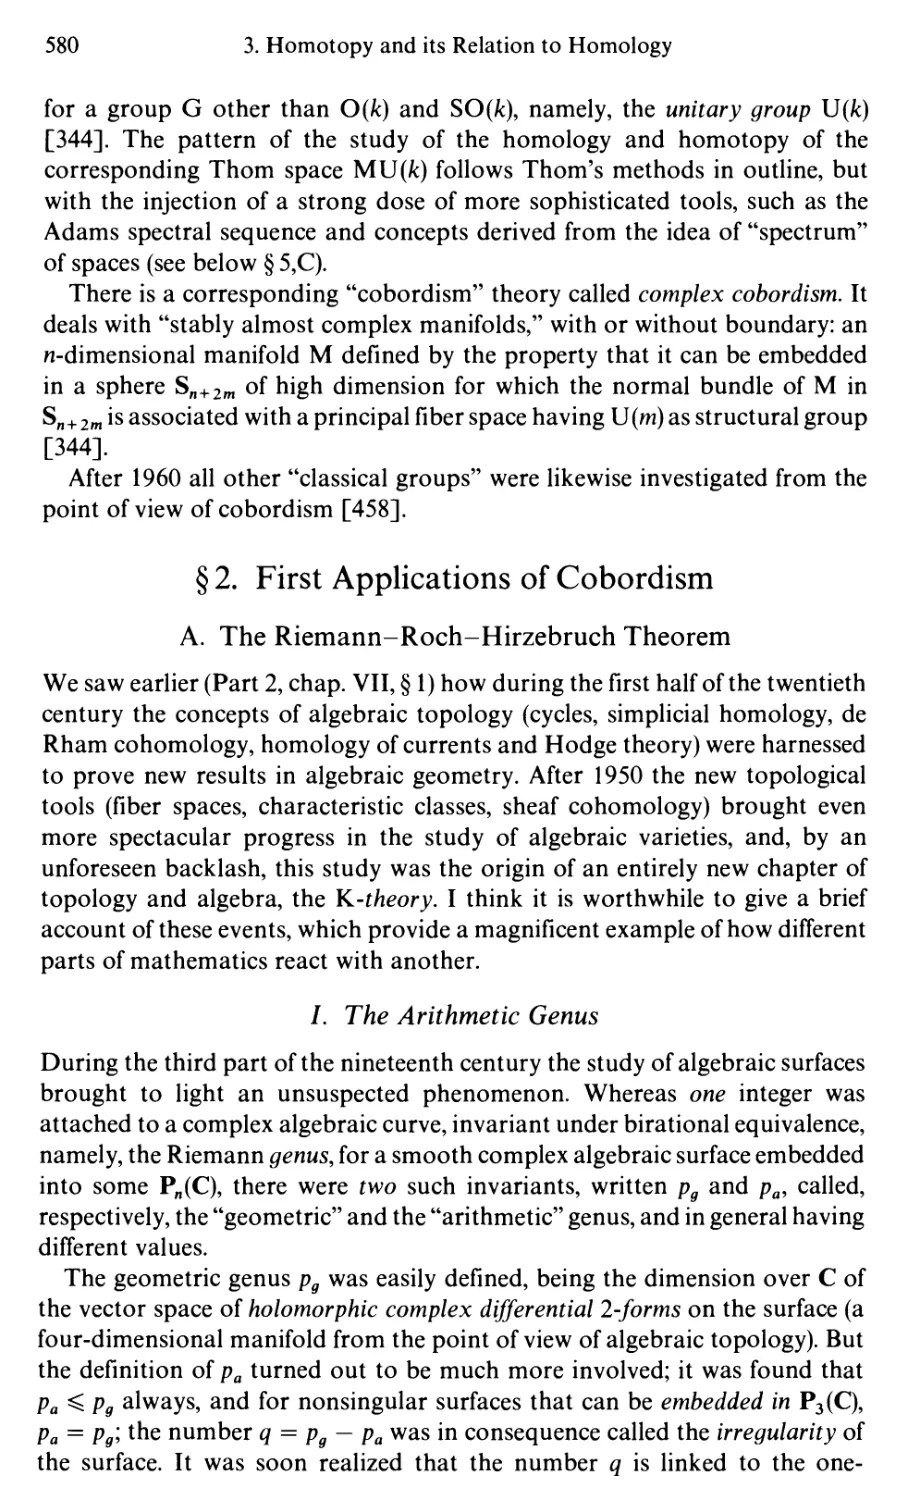 §2. First Applications of Cobordism